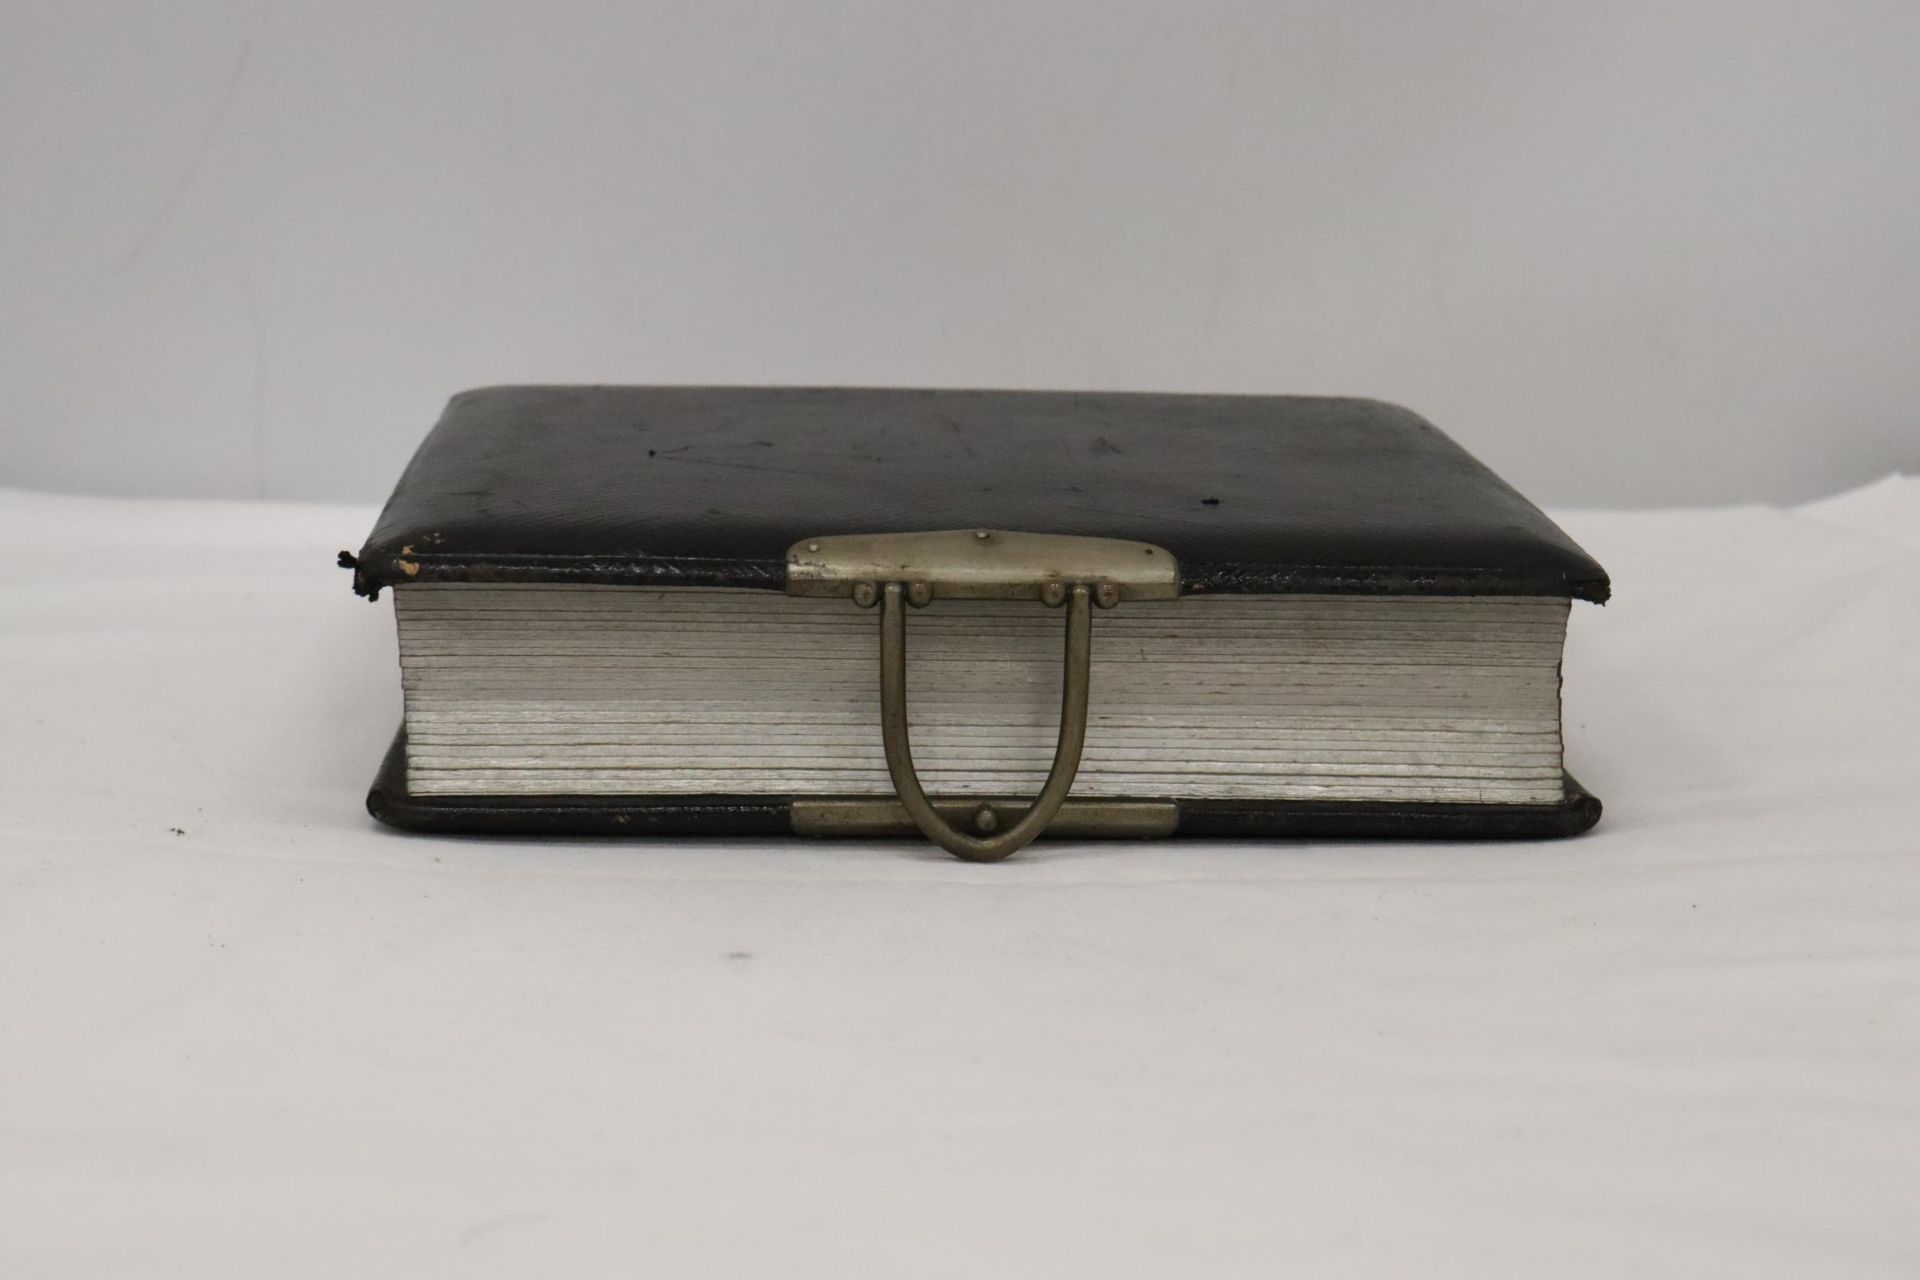 A VICTORIAN LEATHER BOUND PHOTO ALBUM WITH A WHITE METAL SHIELD SHAPED CARTOUCHE TO THE FRONT COVER - Image 5 of 6